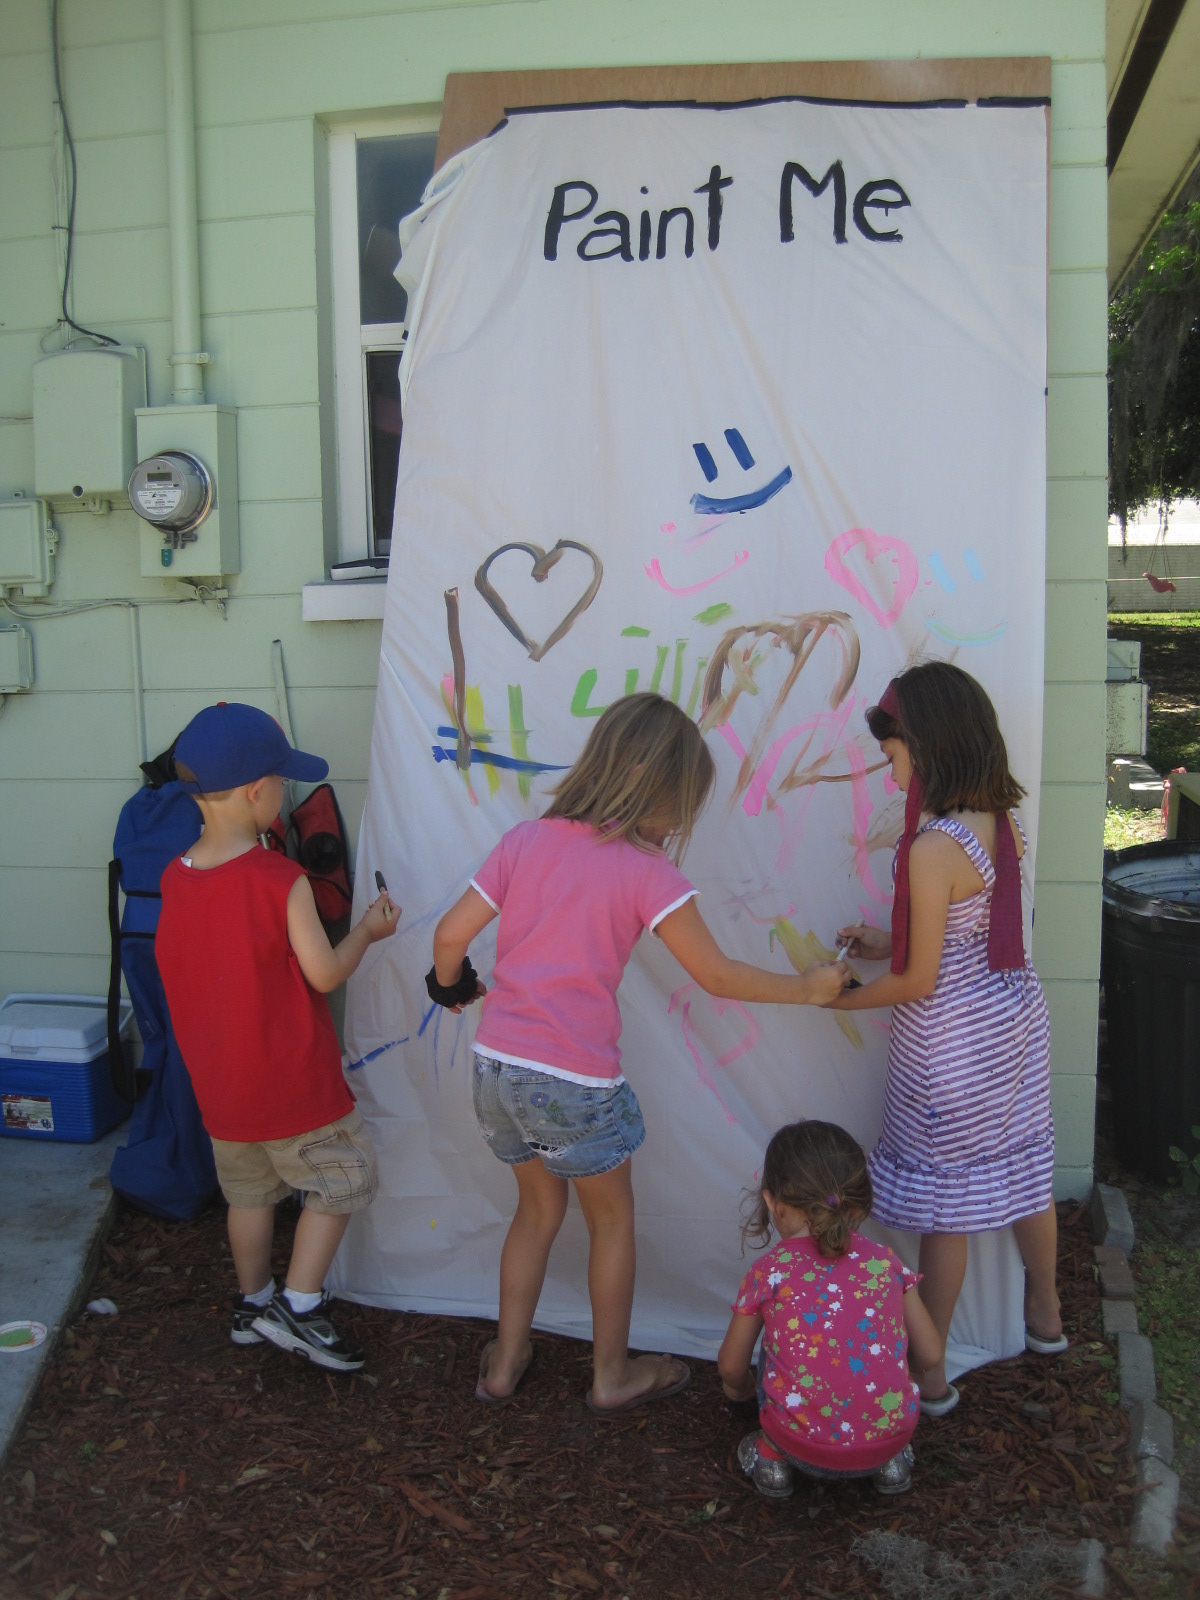 A Kids Painting Birthday Party at Home Makes Unforgettable Fun • KBM D3signs